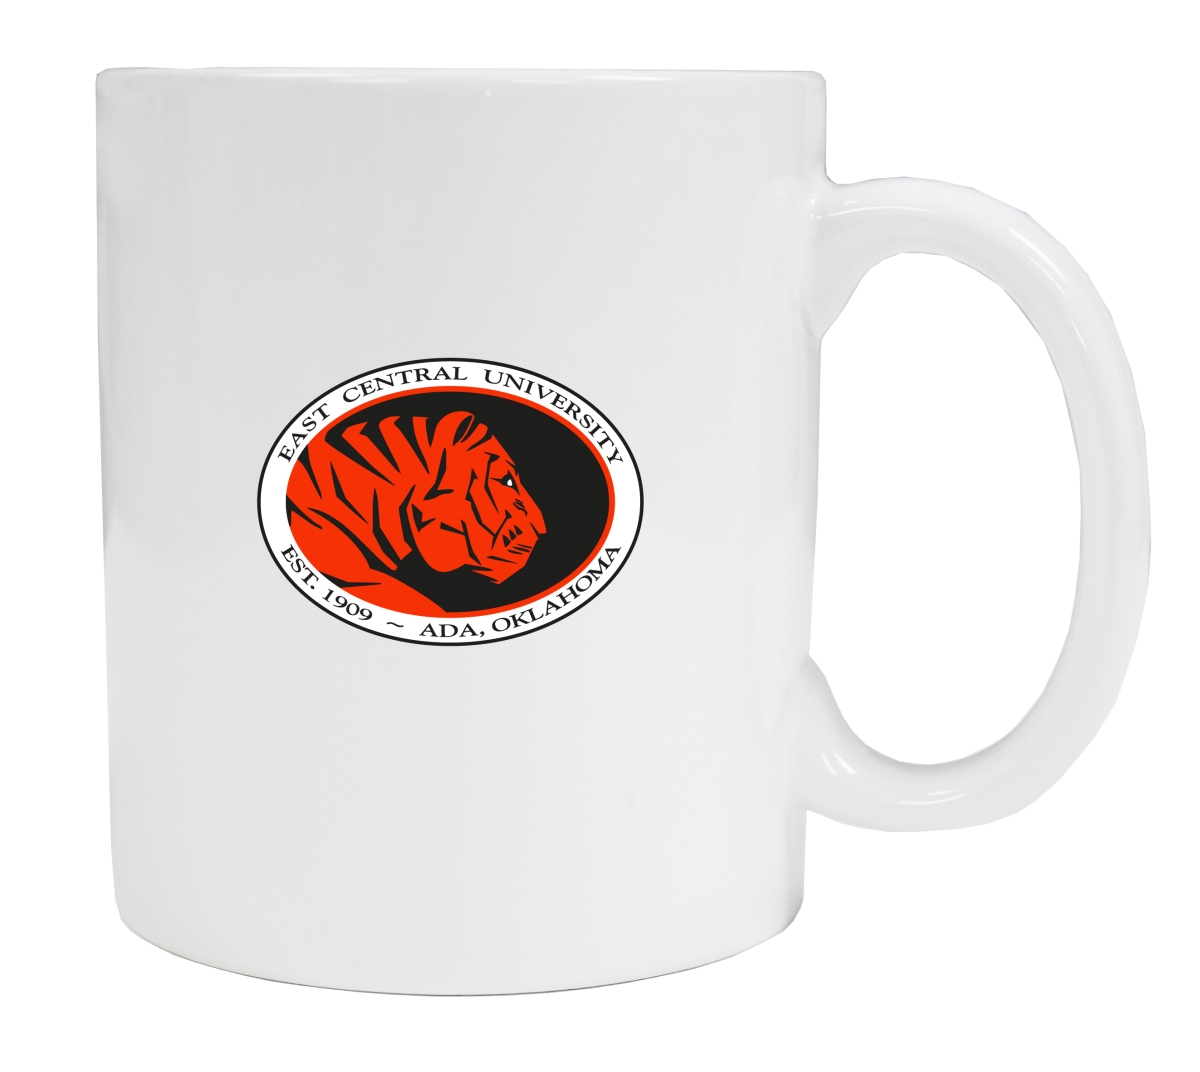 Picture of R & R Imports MUG2-C-ECEN19 W East Central University Tigers White Ceramic Coffee Mug - Pack of 2